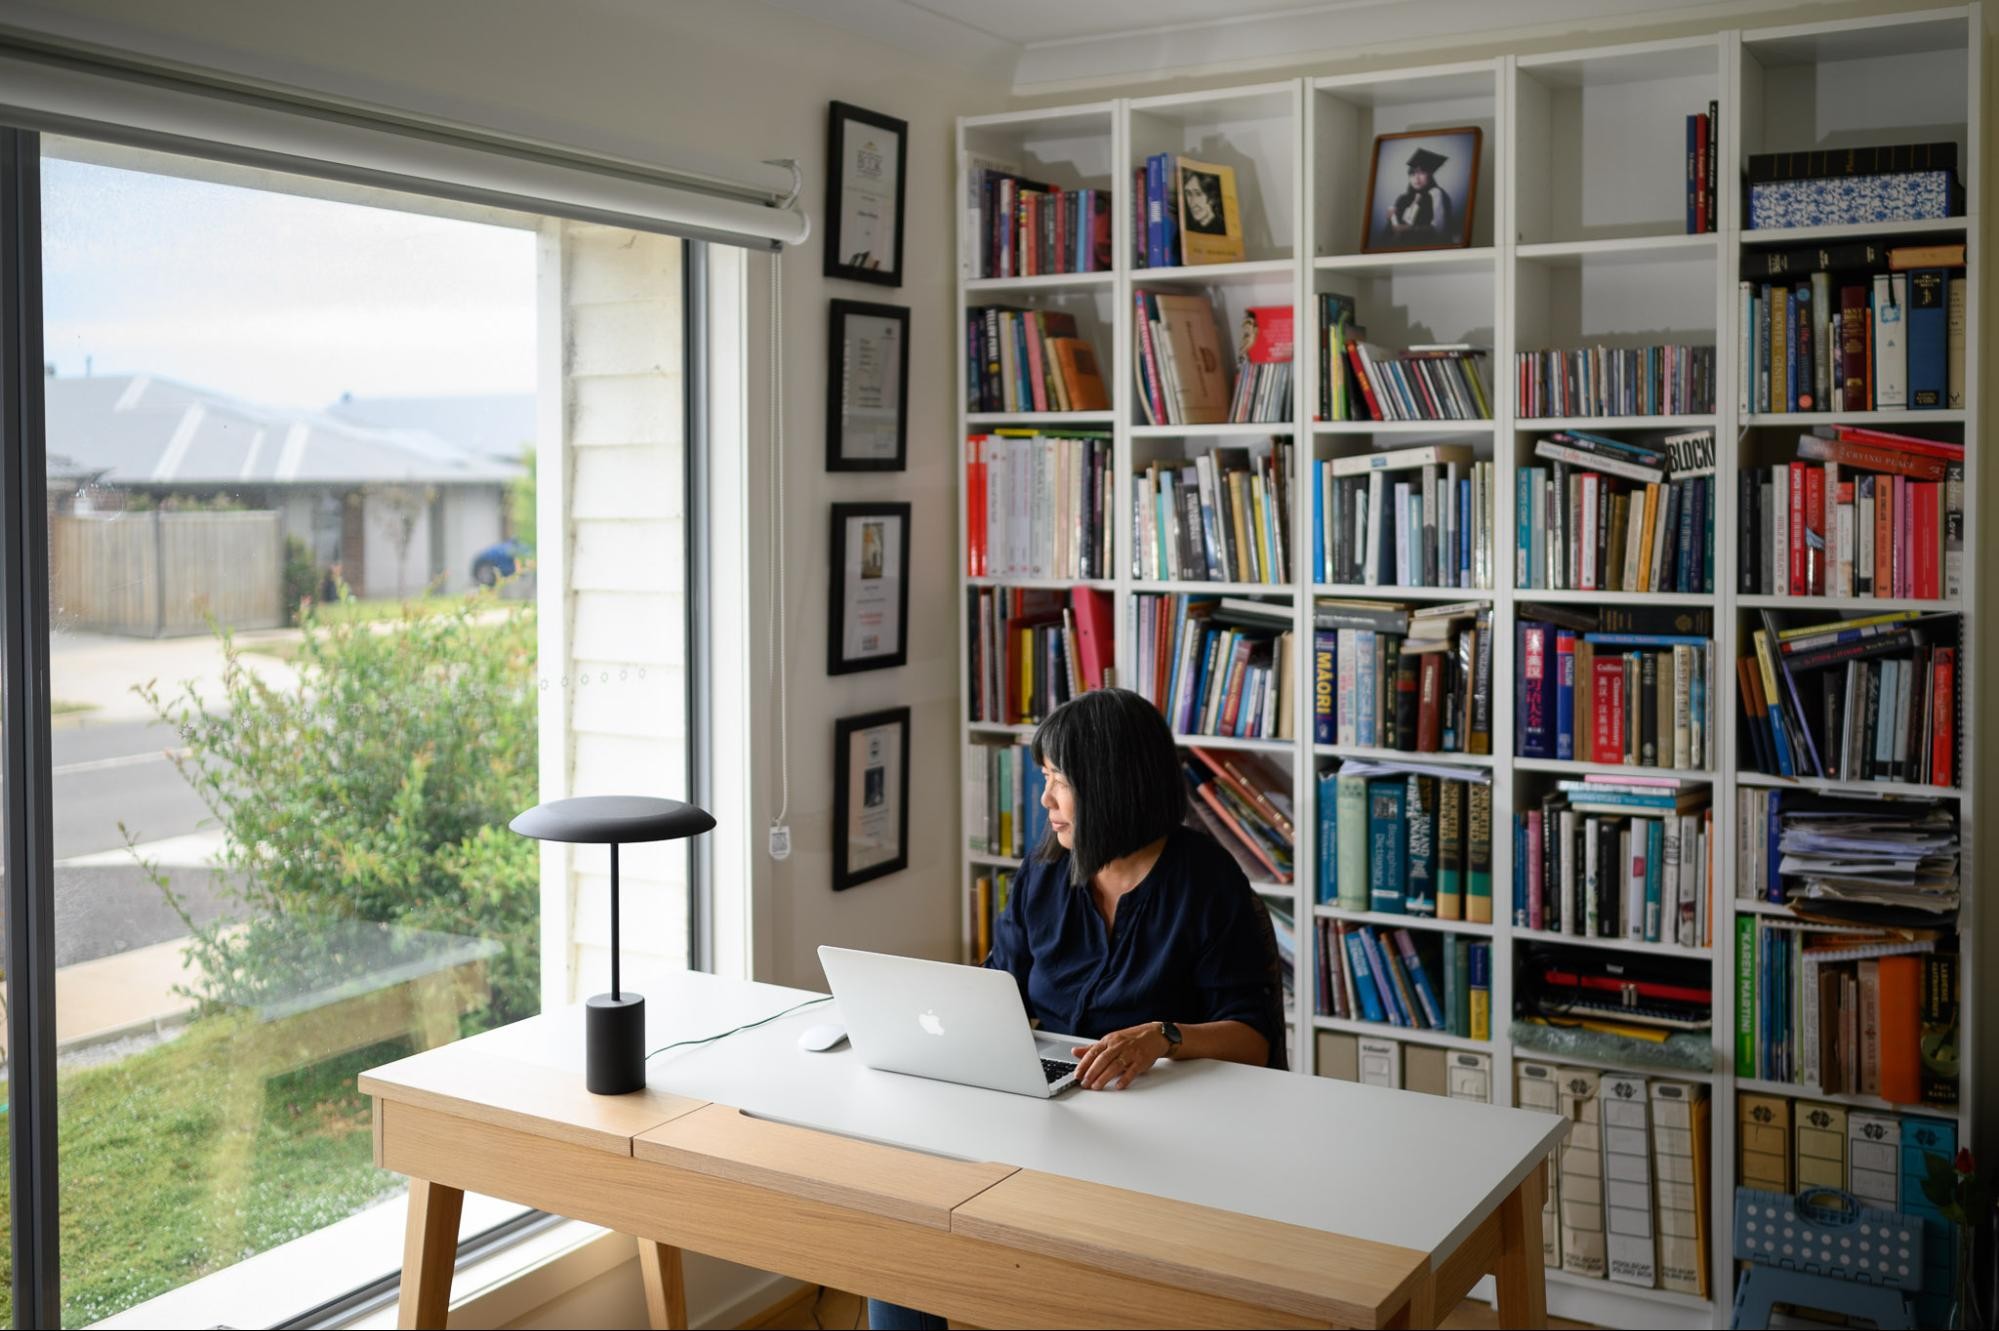 A wide shot of a woman sitting at a desk with her laptop, floor-to-ceiling bookshelves behind her. The woman is looking out the window.